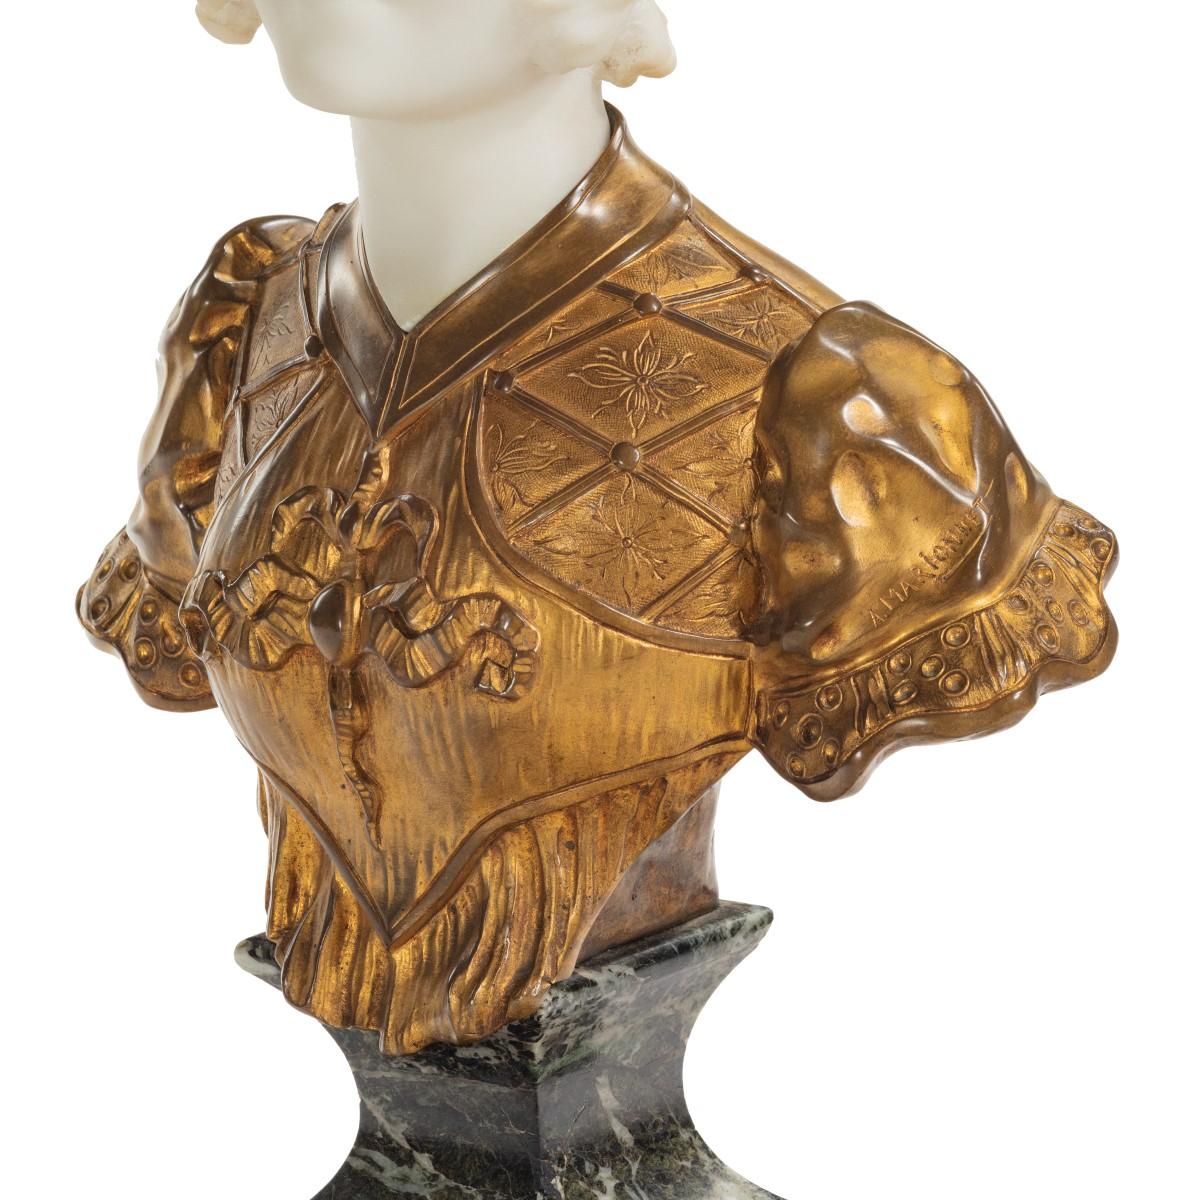 A marble and ormolu bust by Marionnet